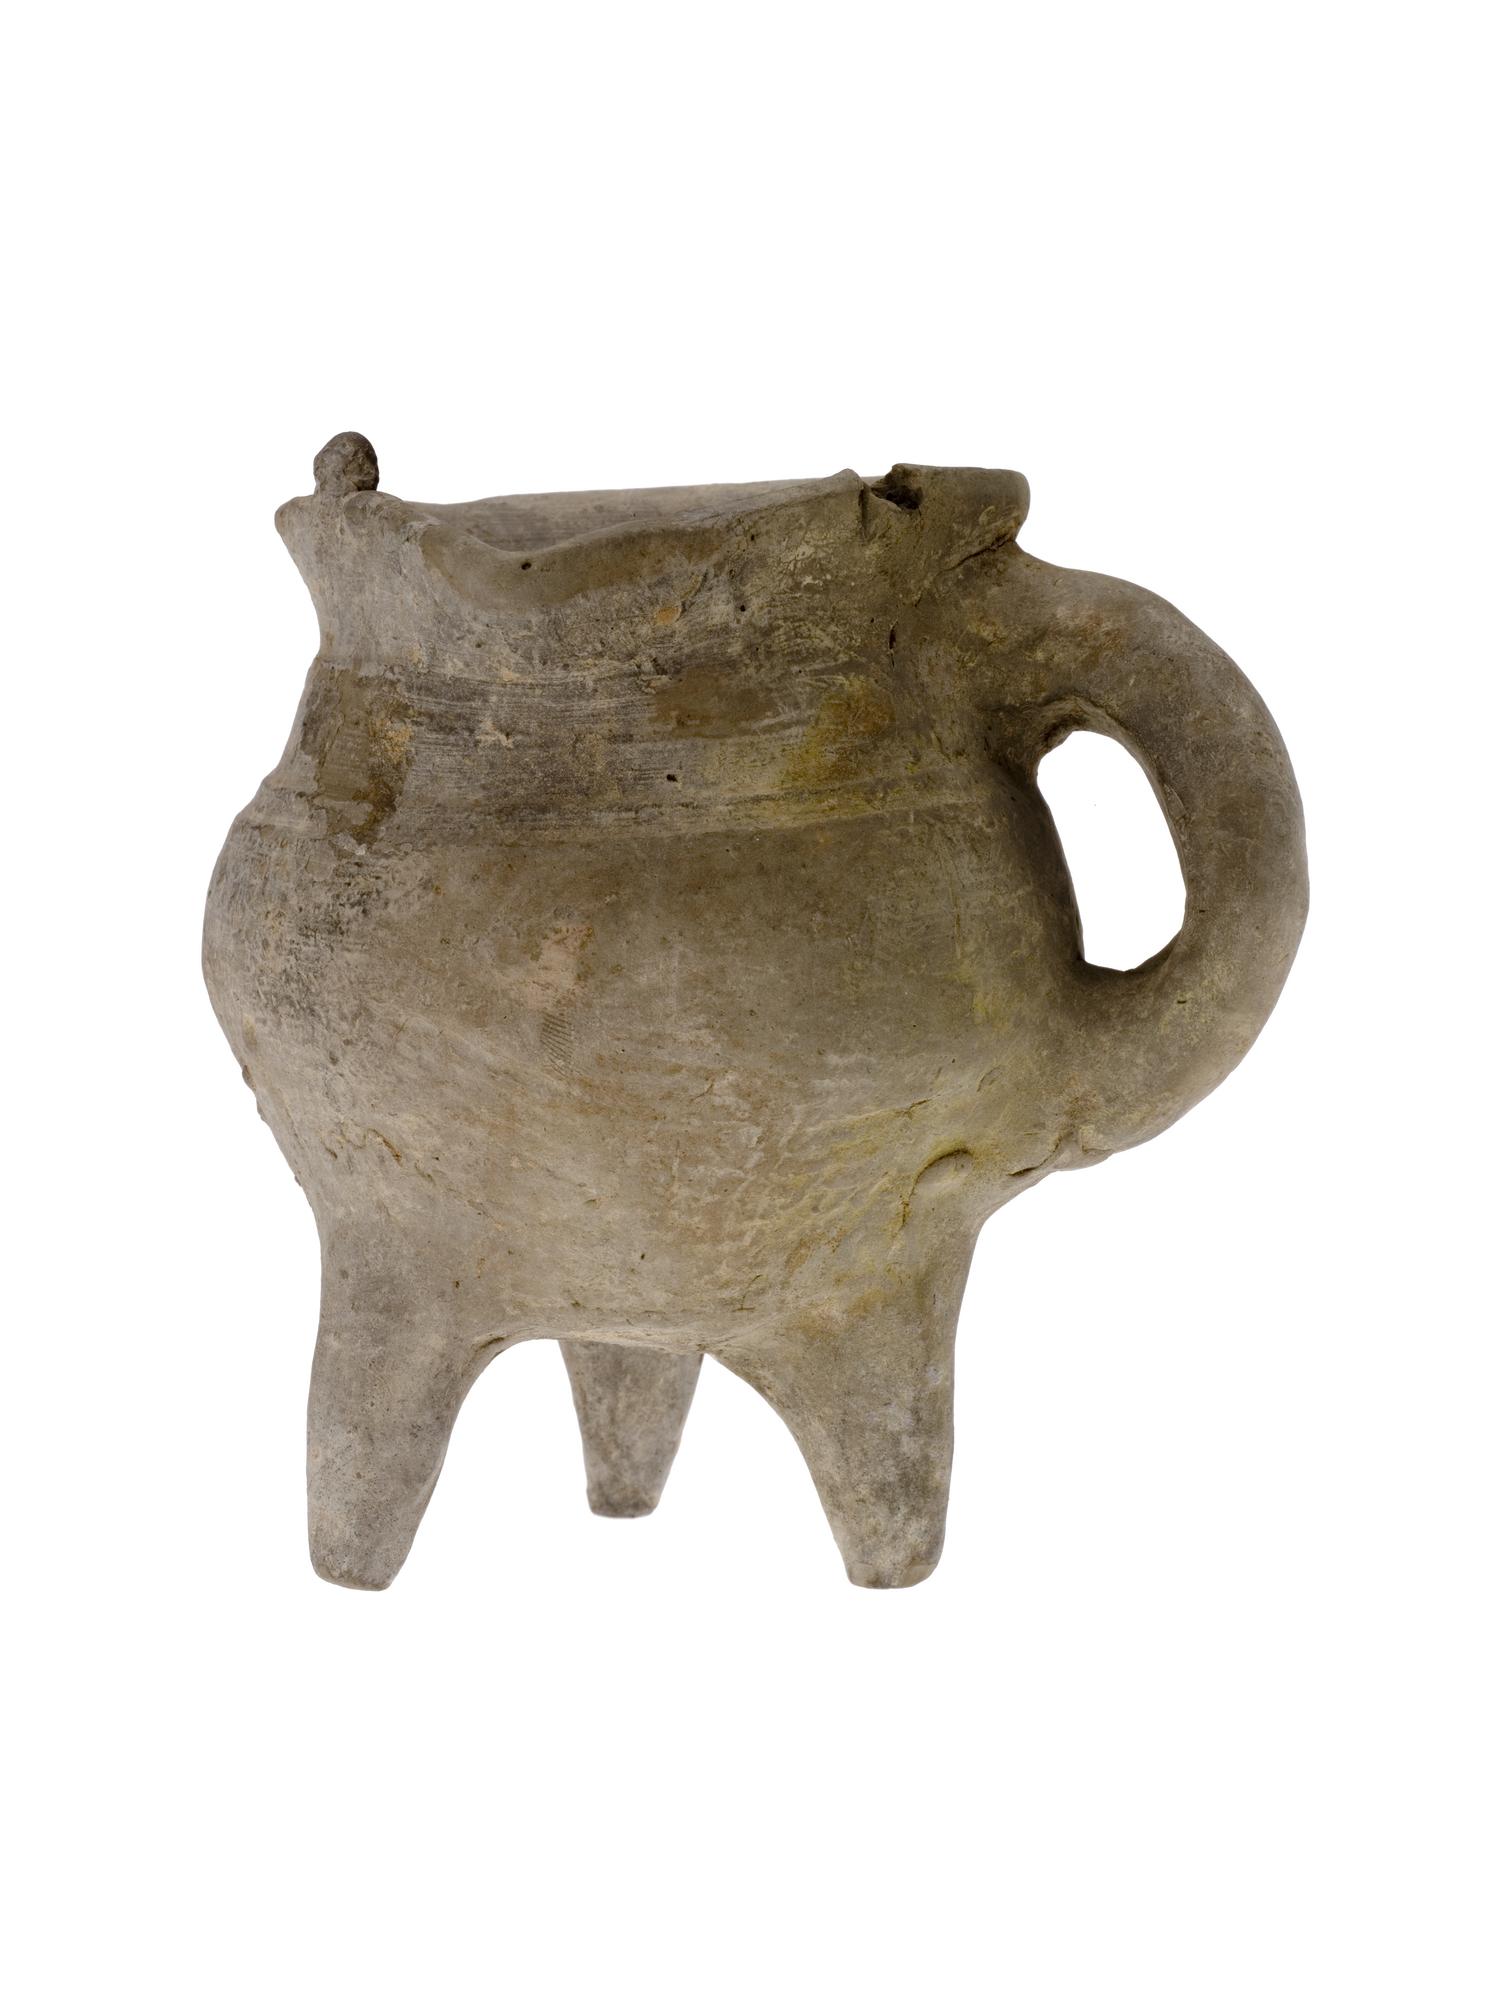 Jue (vessel) of rough grey unglazed earthenware, with a bulbous body standing on three short tapering legs, and mat impressions: China, Shang dynasty, c.1500-1050 BC.